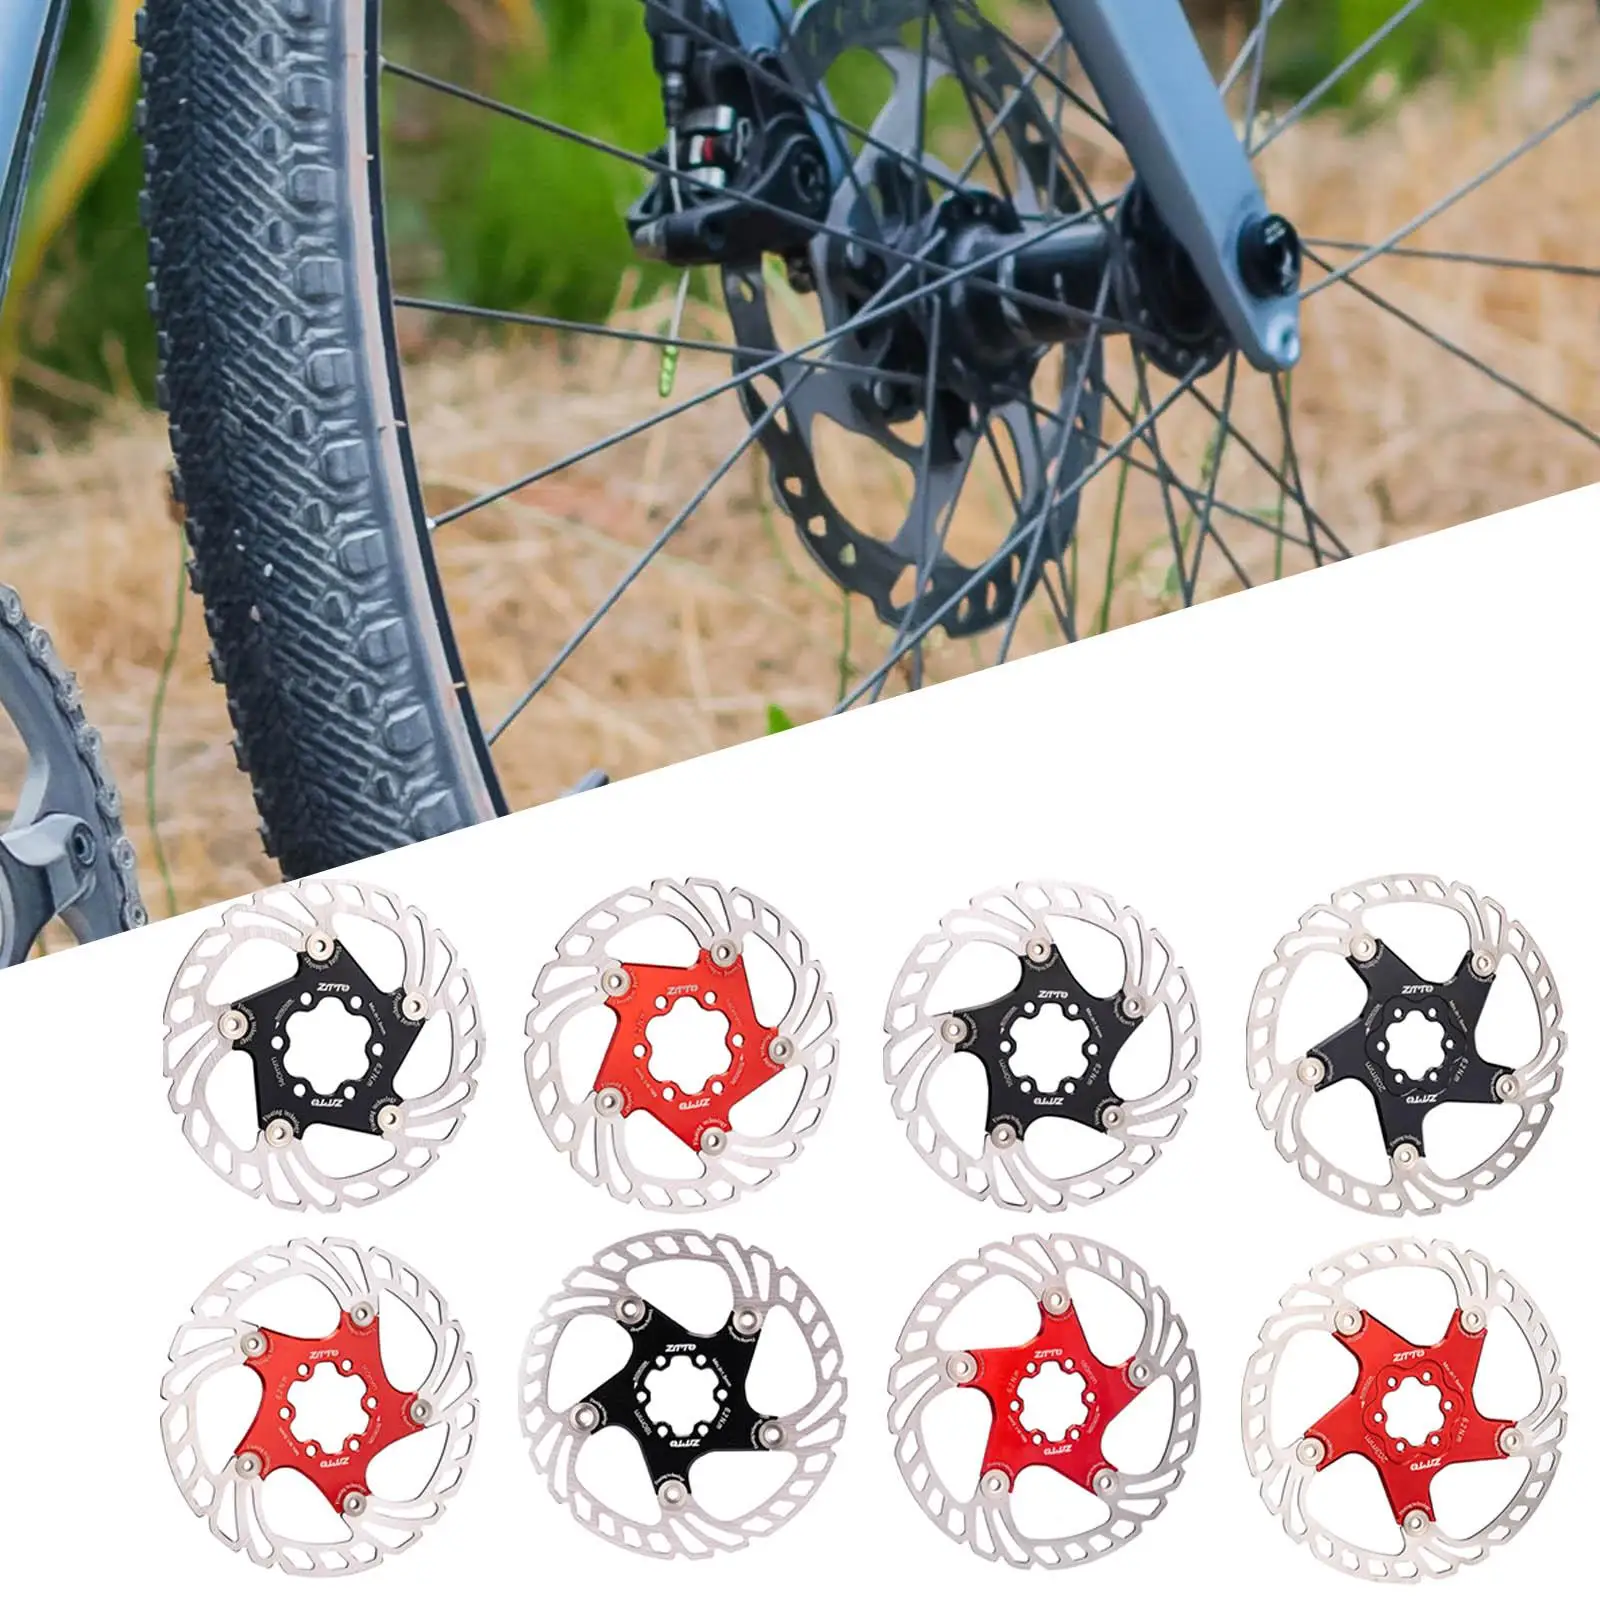 Bike Hydraulic Disc Brake Rotor Stainless Steel Bicycle Brake Disc Floating Disc Brake Pads for MTB BMX Road Cycling Accessories